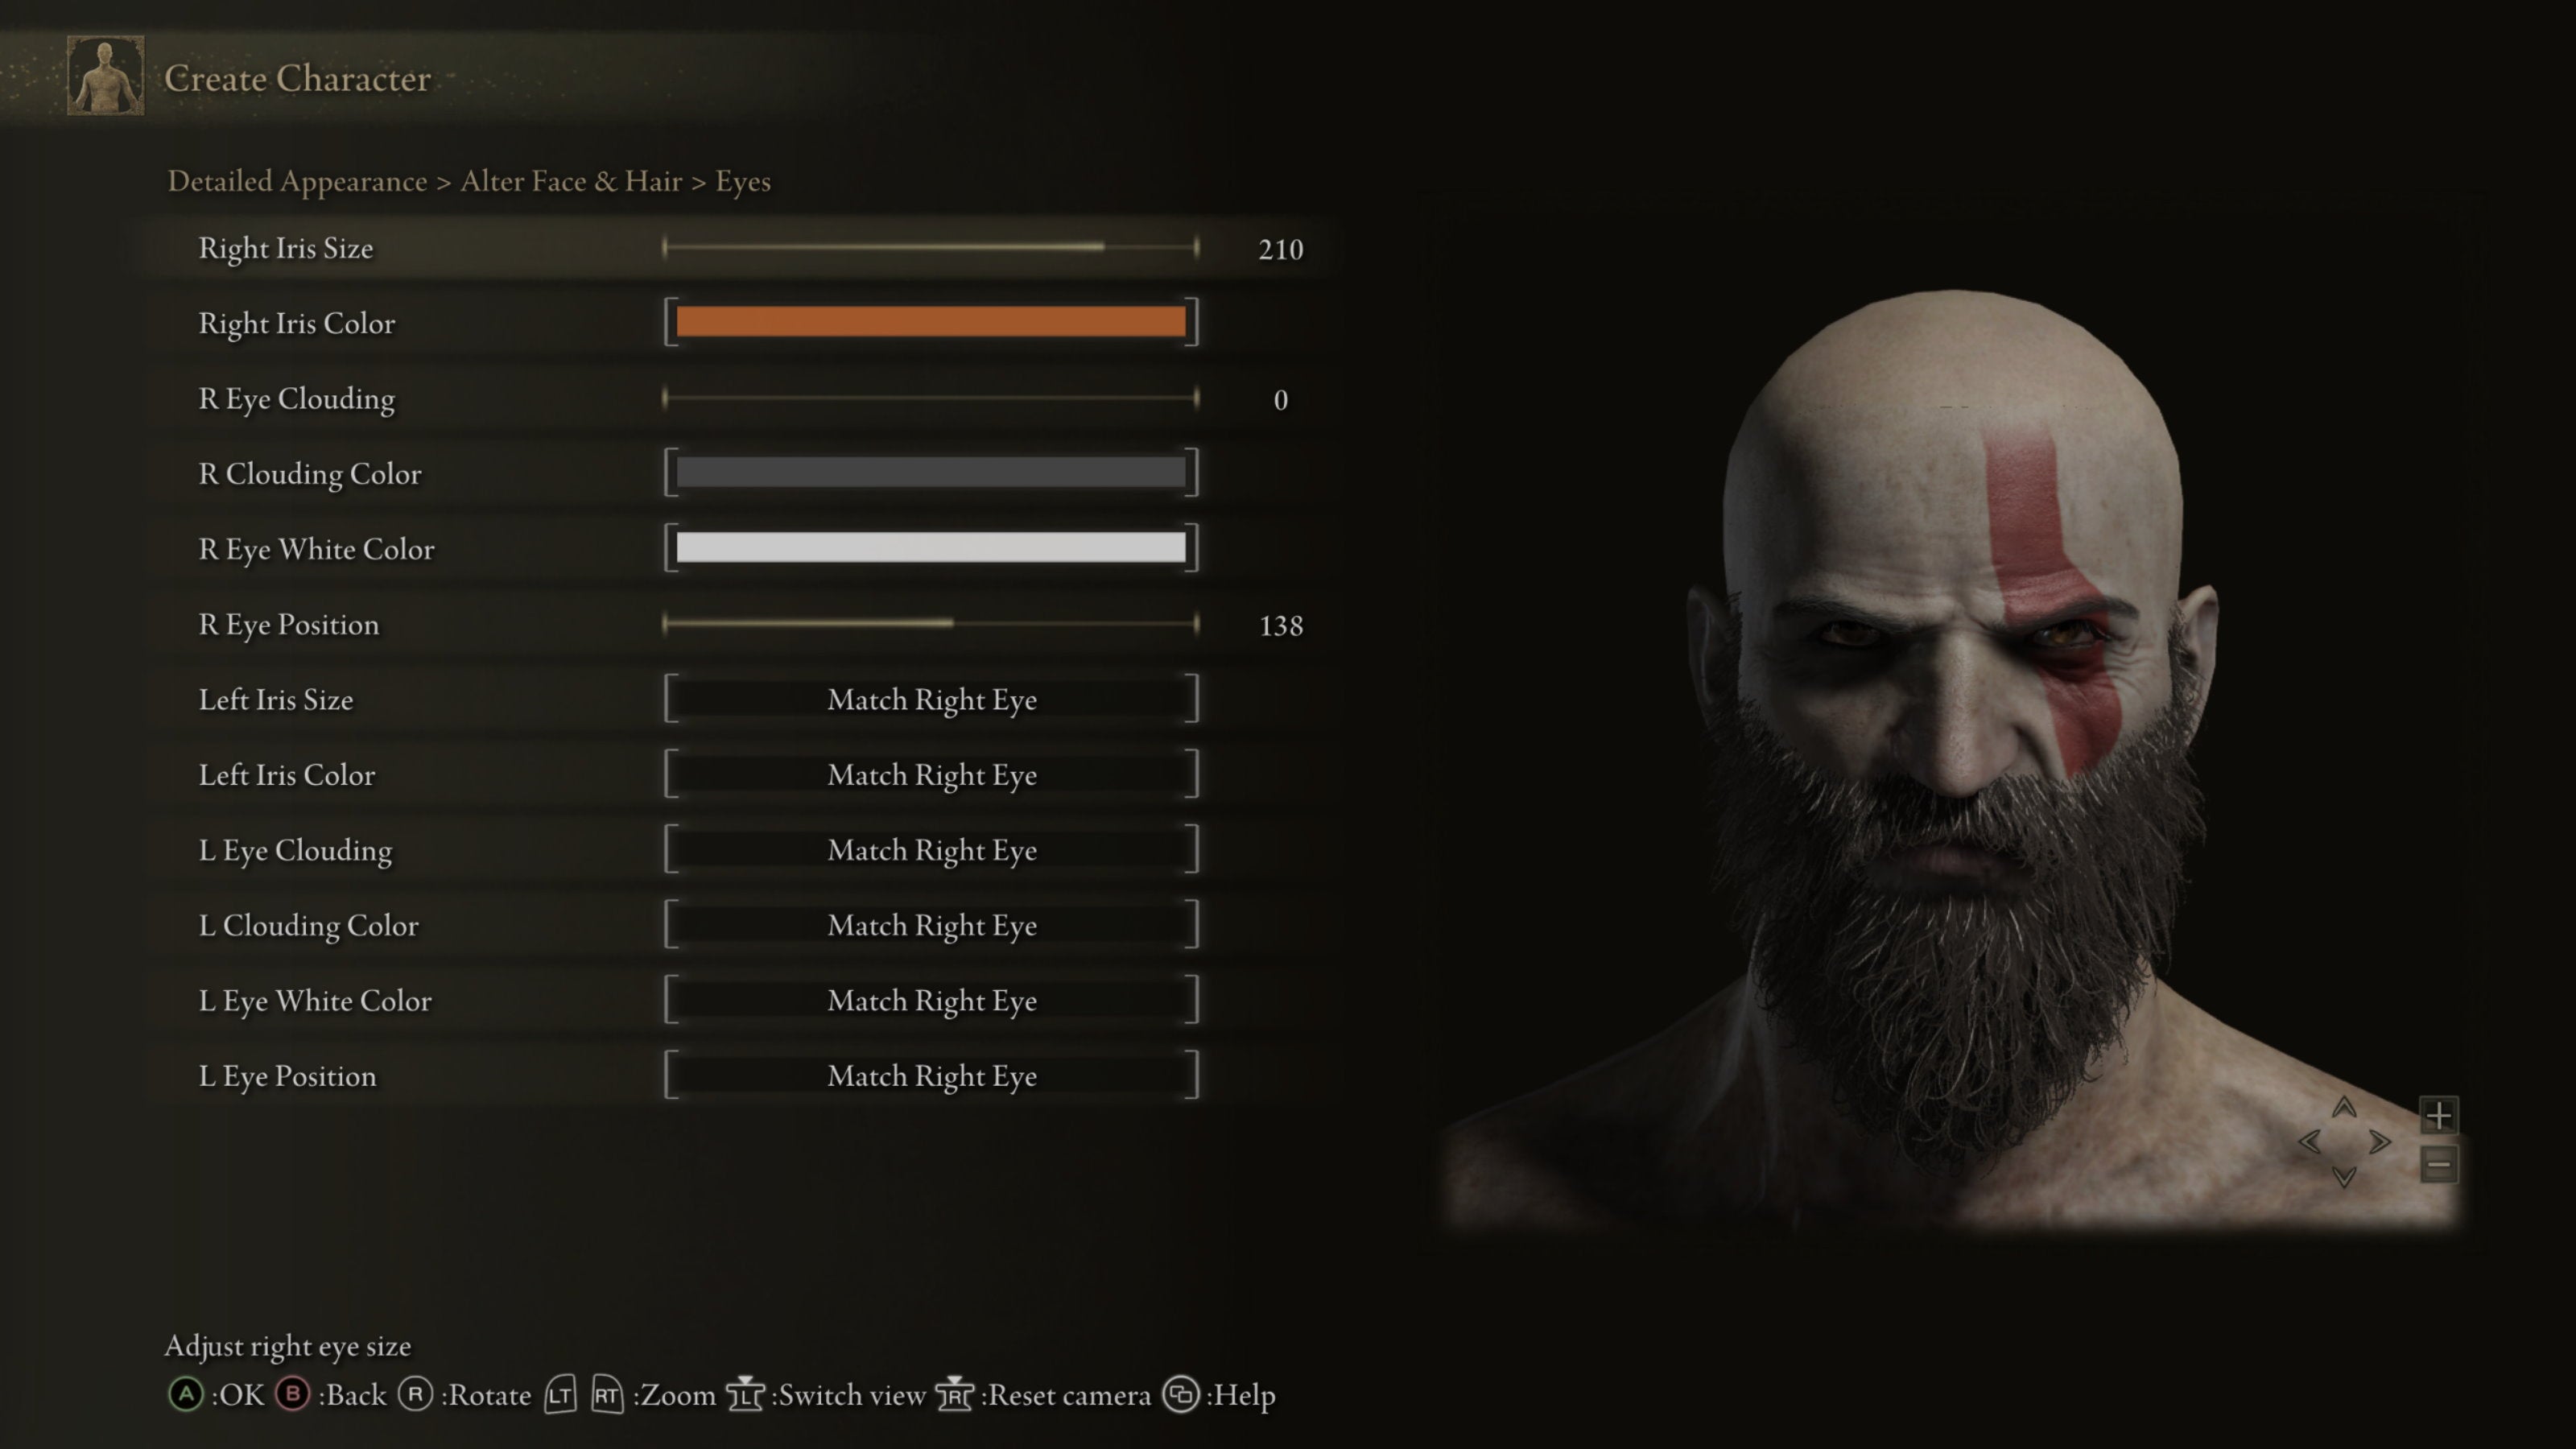 Image for Elden Ring players are making horrific masterpieces with the character creator